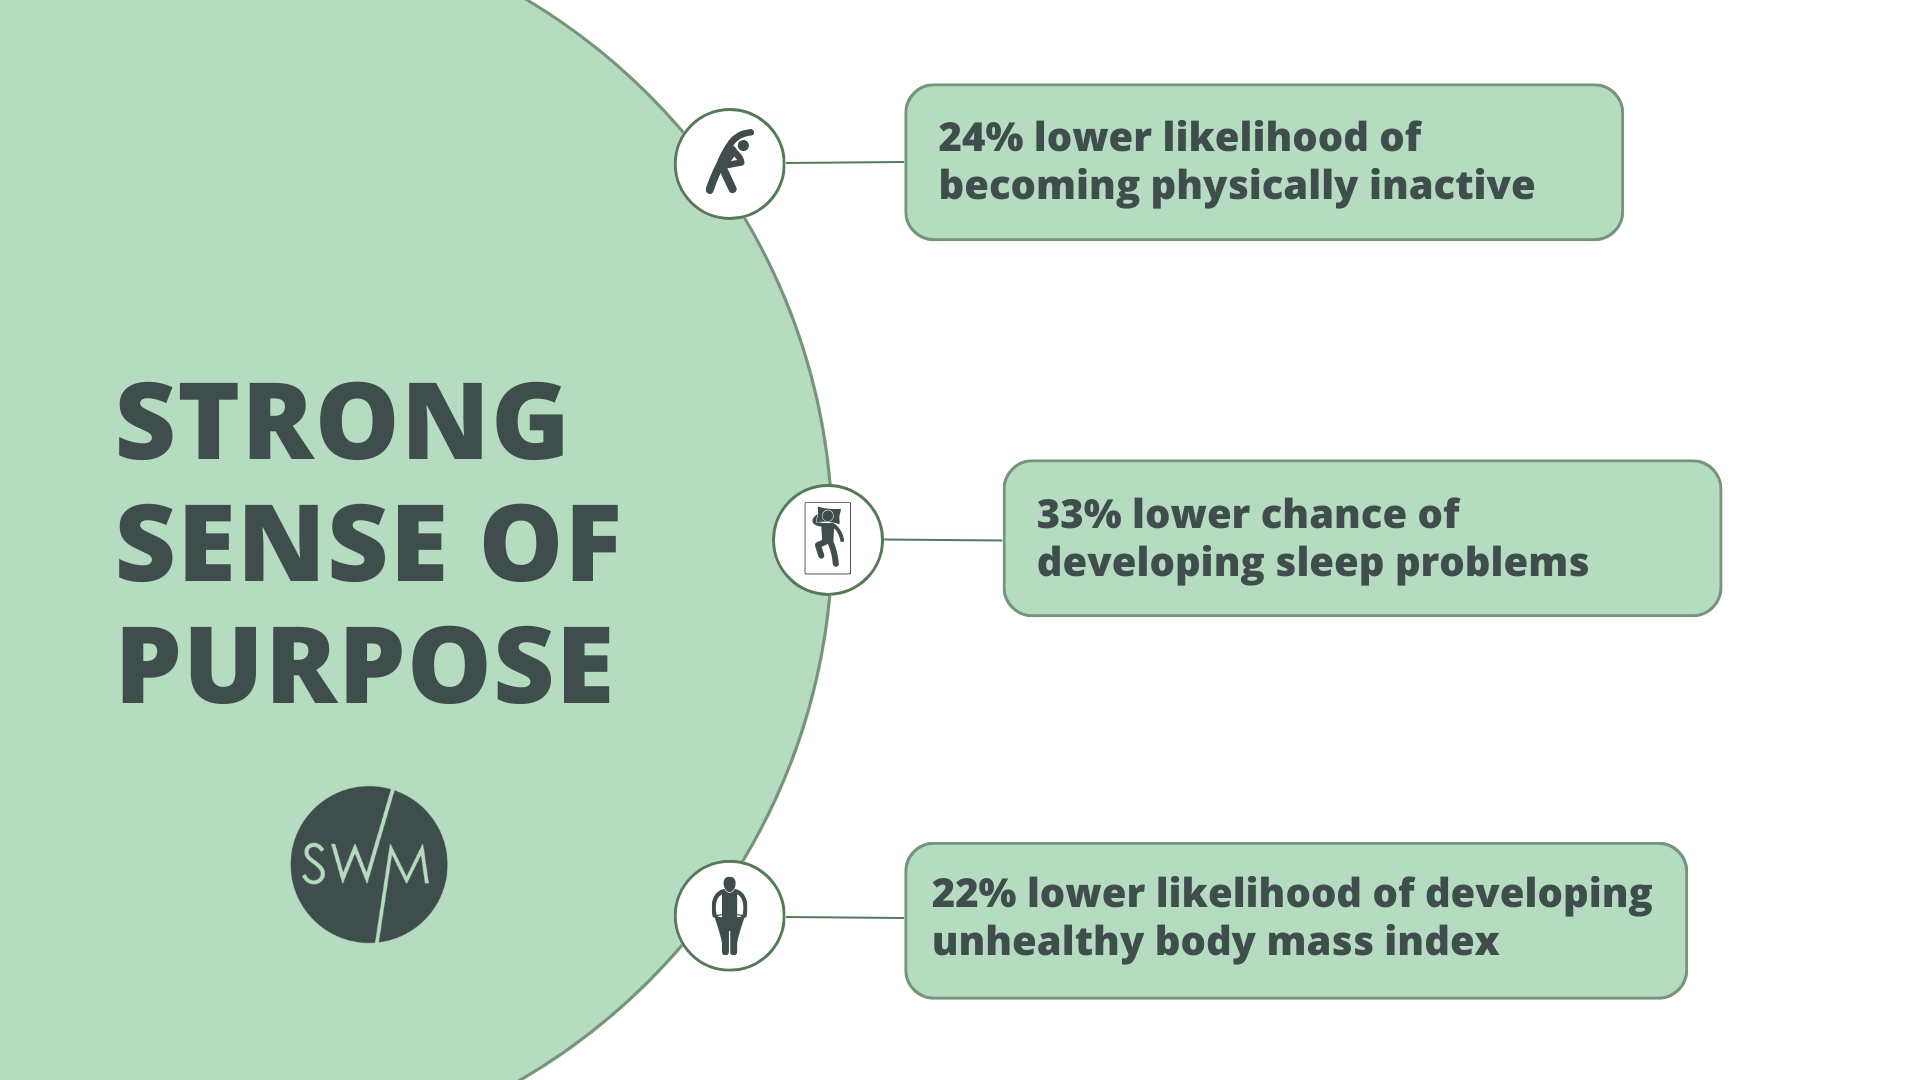 strong sense of purpose in older adults leads to a lower likelihood of becoming physically incative, developing sleep probelms, and an unhealthy body mass index